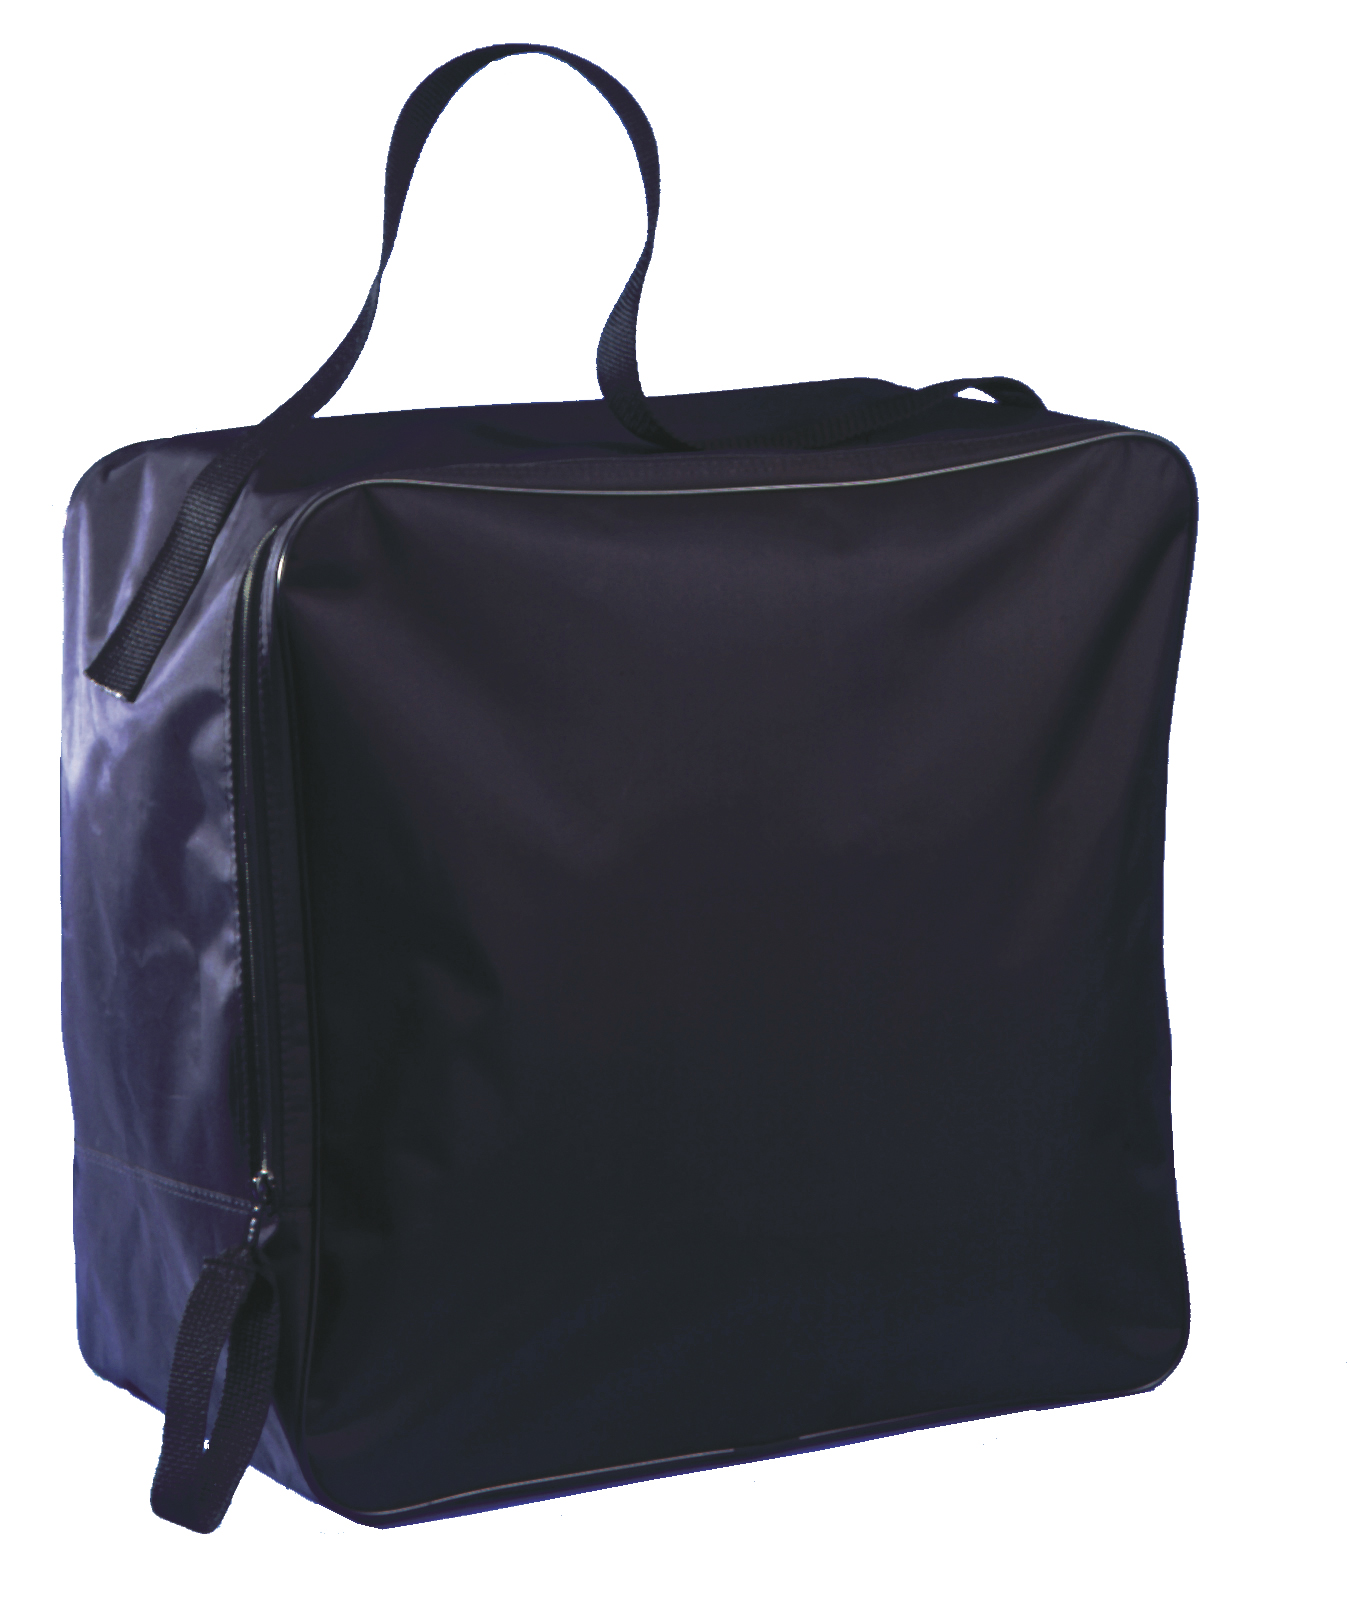 Unbranded Toilet Seat Carry Bag